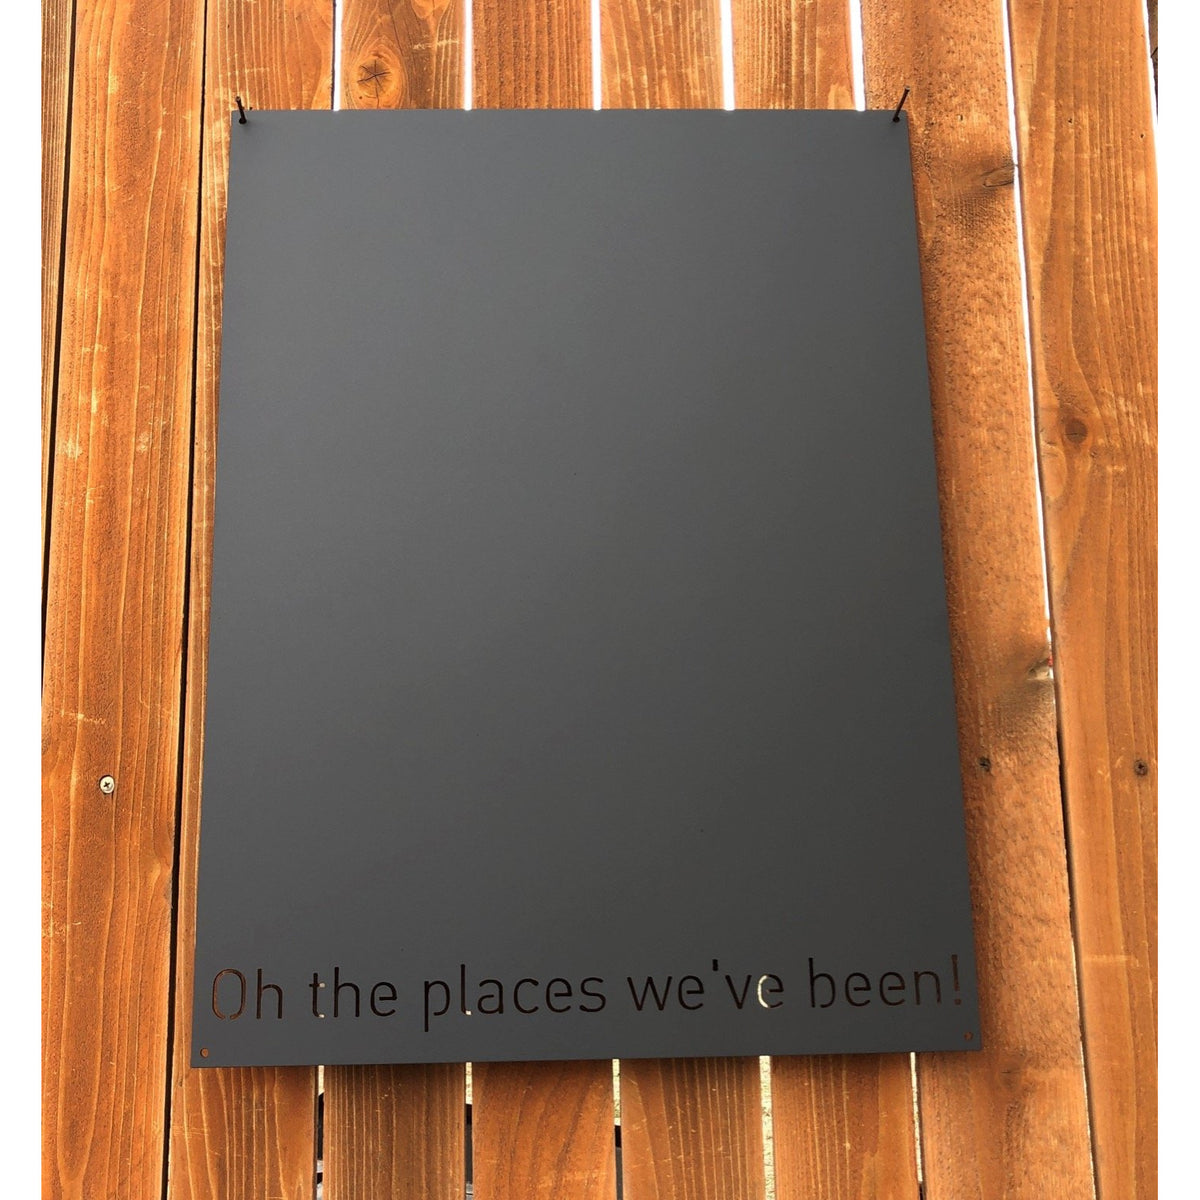 Oh the places we've been! | Magnet Board | 18"x24" | #1206a